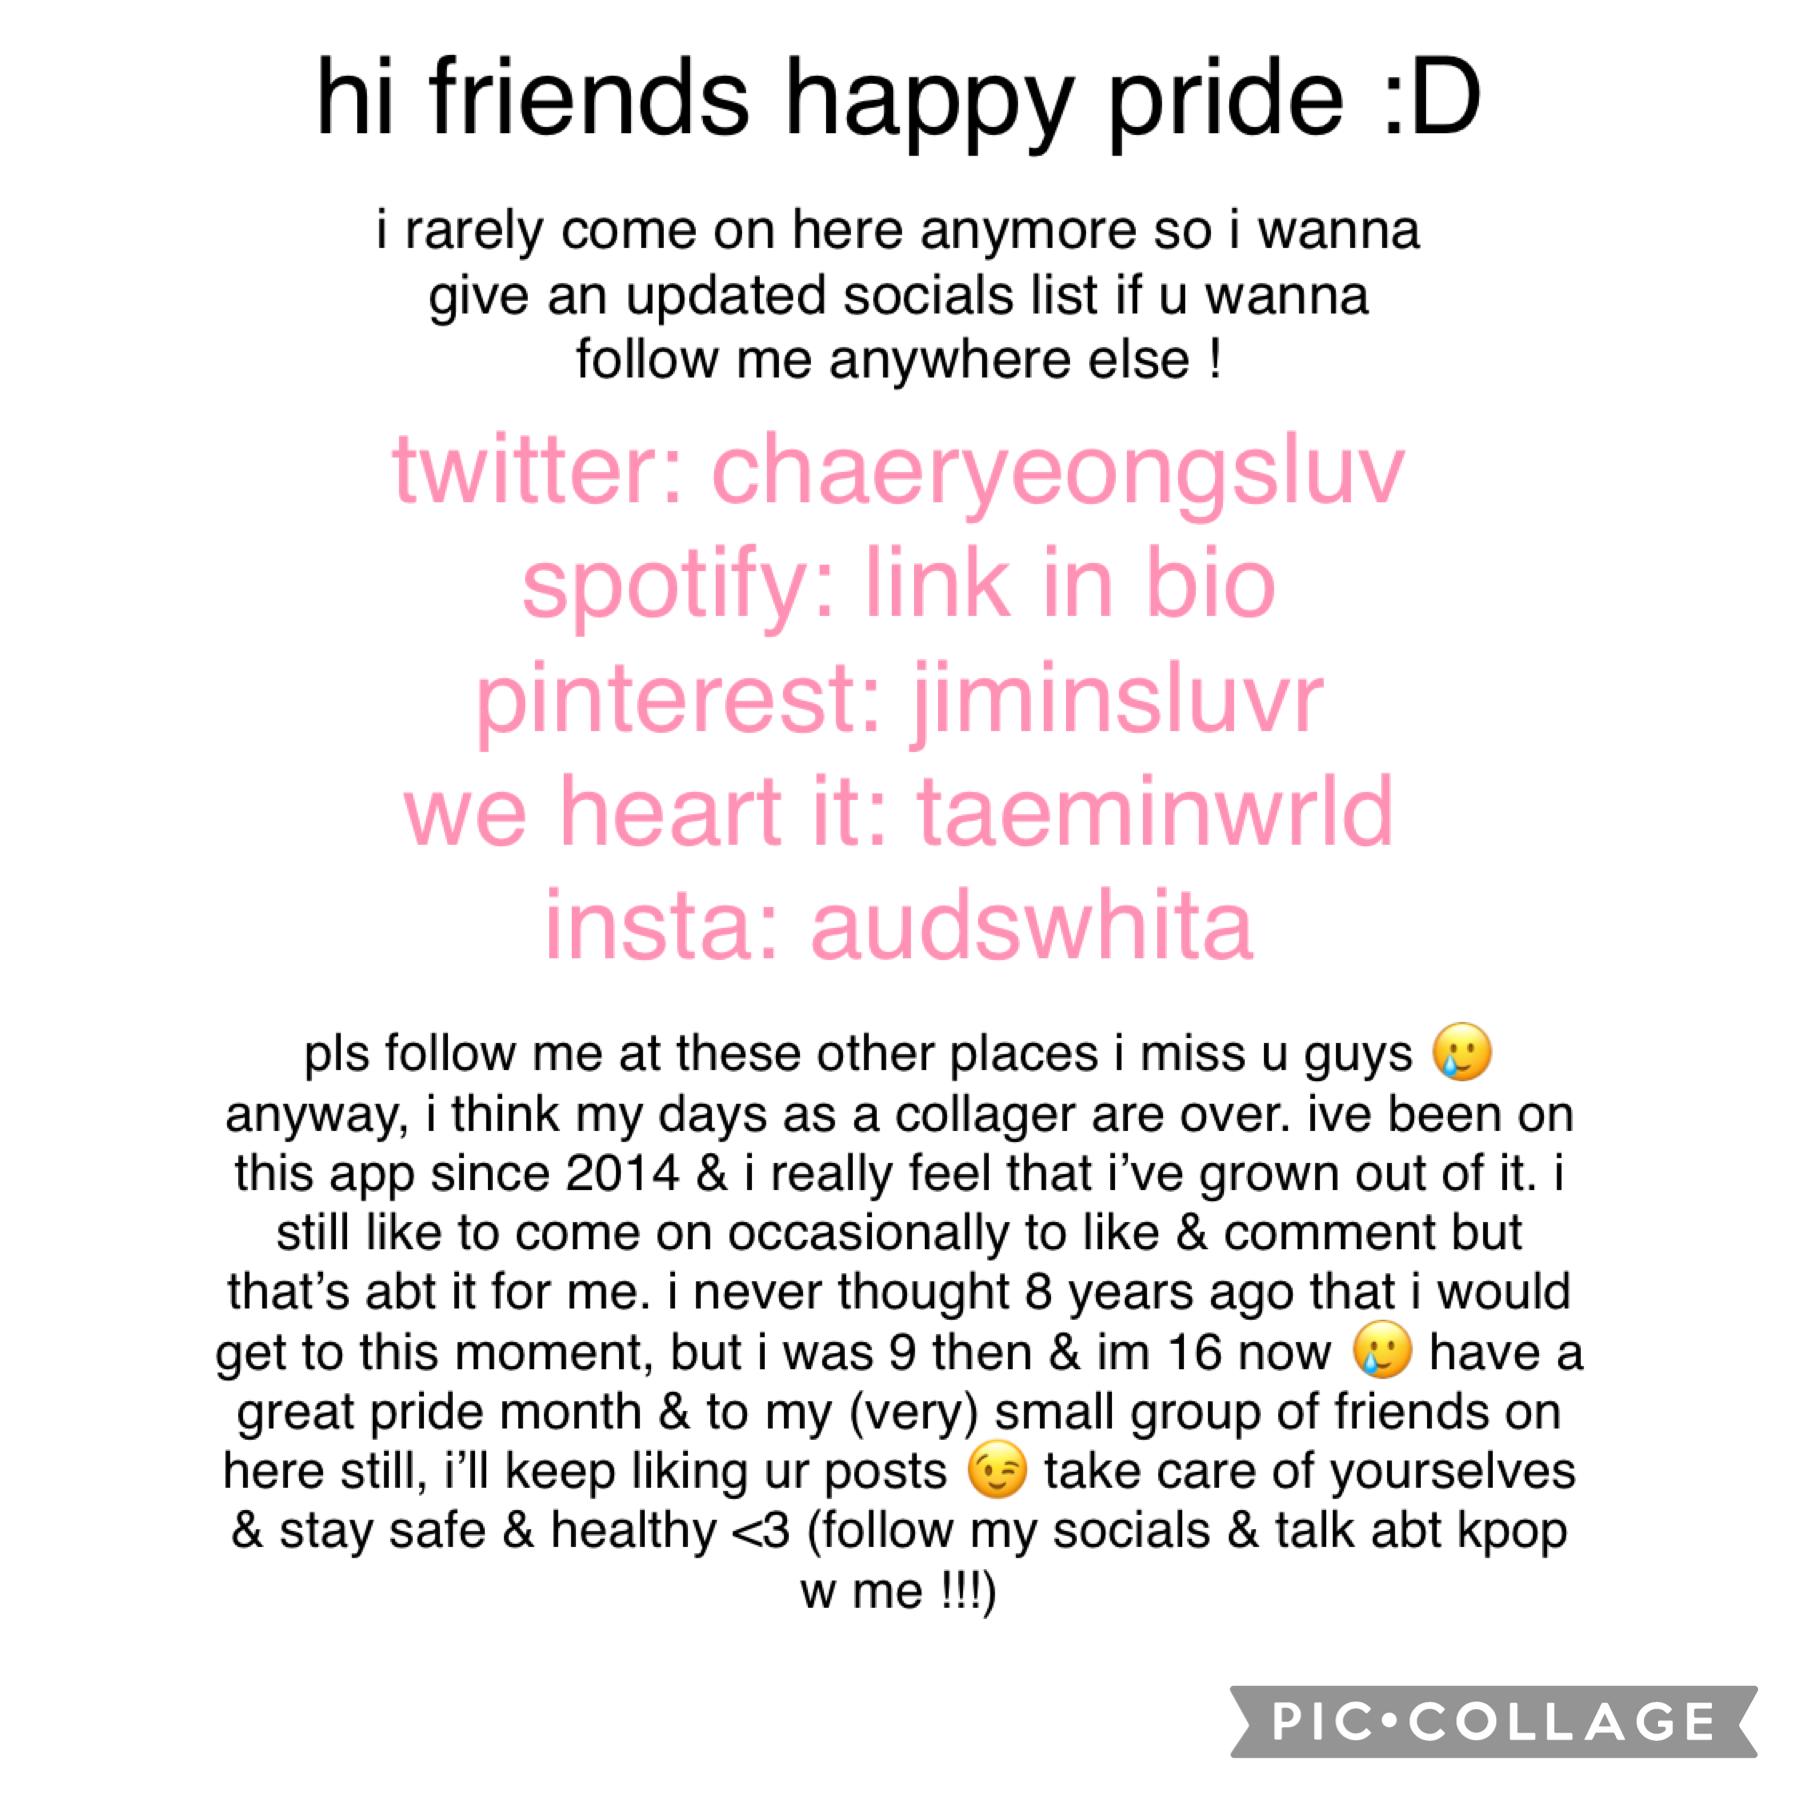 thank u pc 🥺 it’s been 8 happy years but it’s time to move on :’) & happy pride!!!